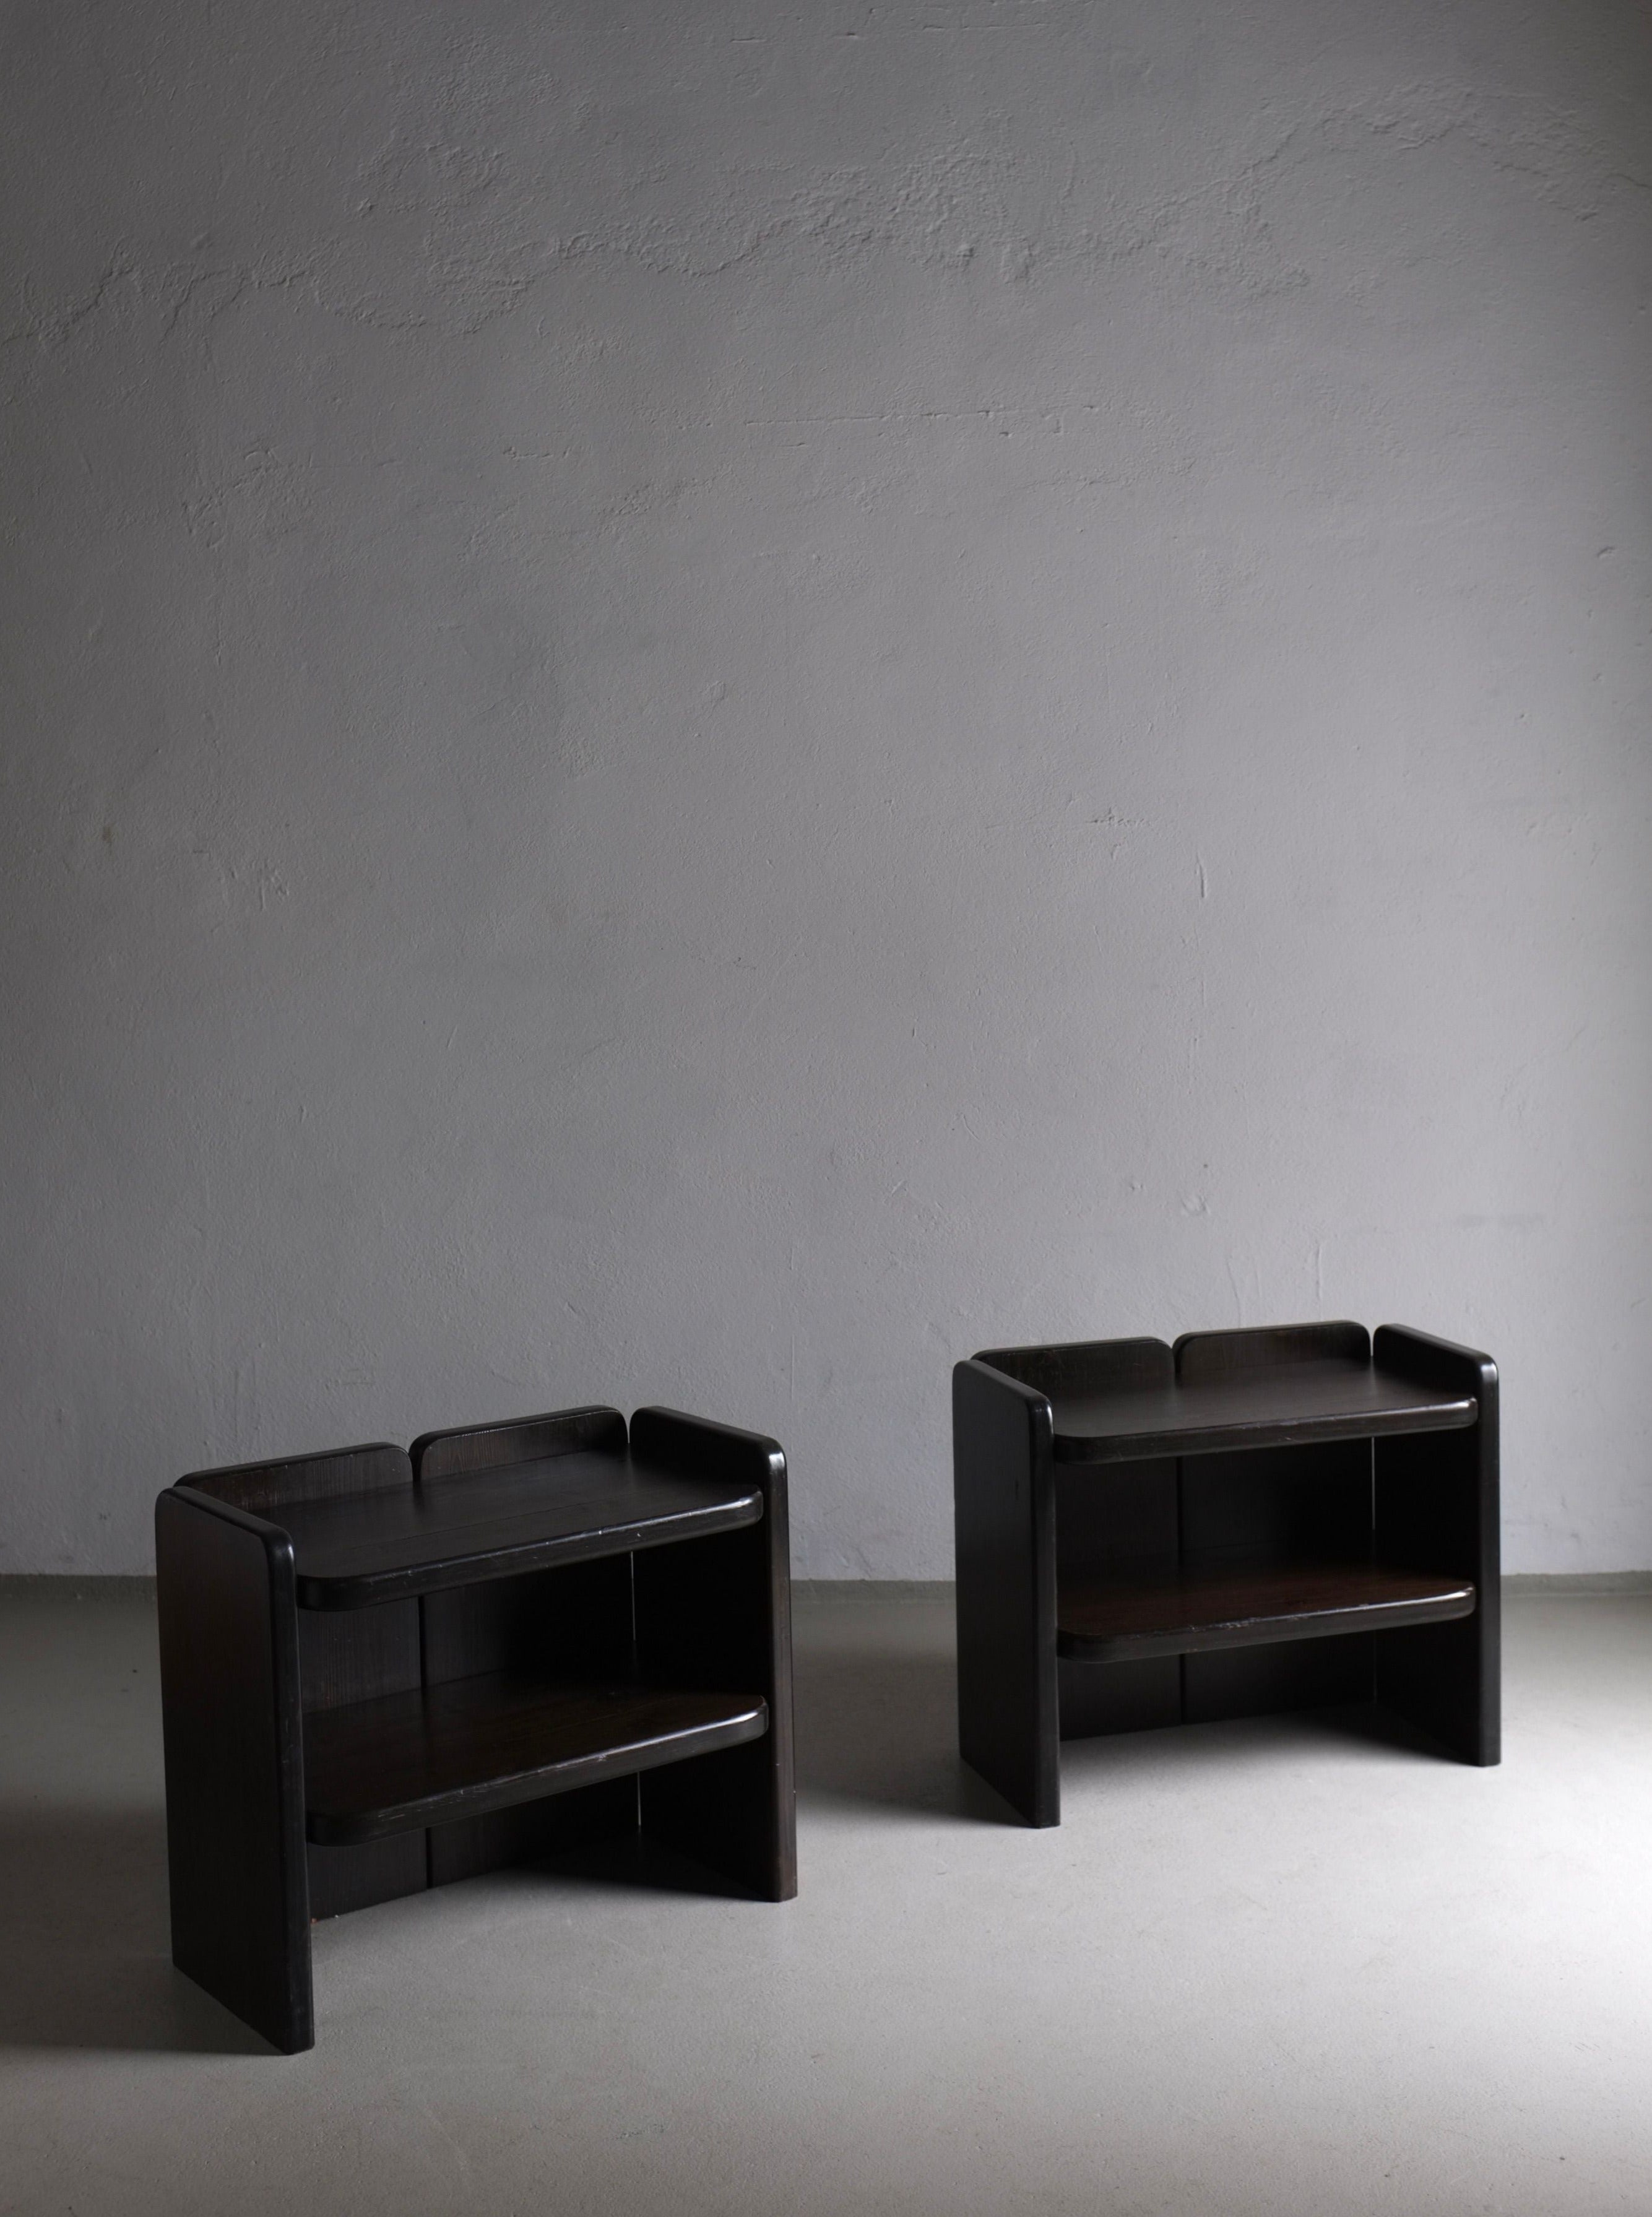 Two Veter Vintage 2 Brutalist Dark Wood Night Stands | 1970s, in vintage condition, are placed against a plain, light gray wall. The night stands have a simple, modern design with curved edges and a minimalist aesthetic. The room appears empty with a smooth floor, emphasizing the furniture.